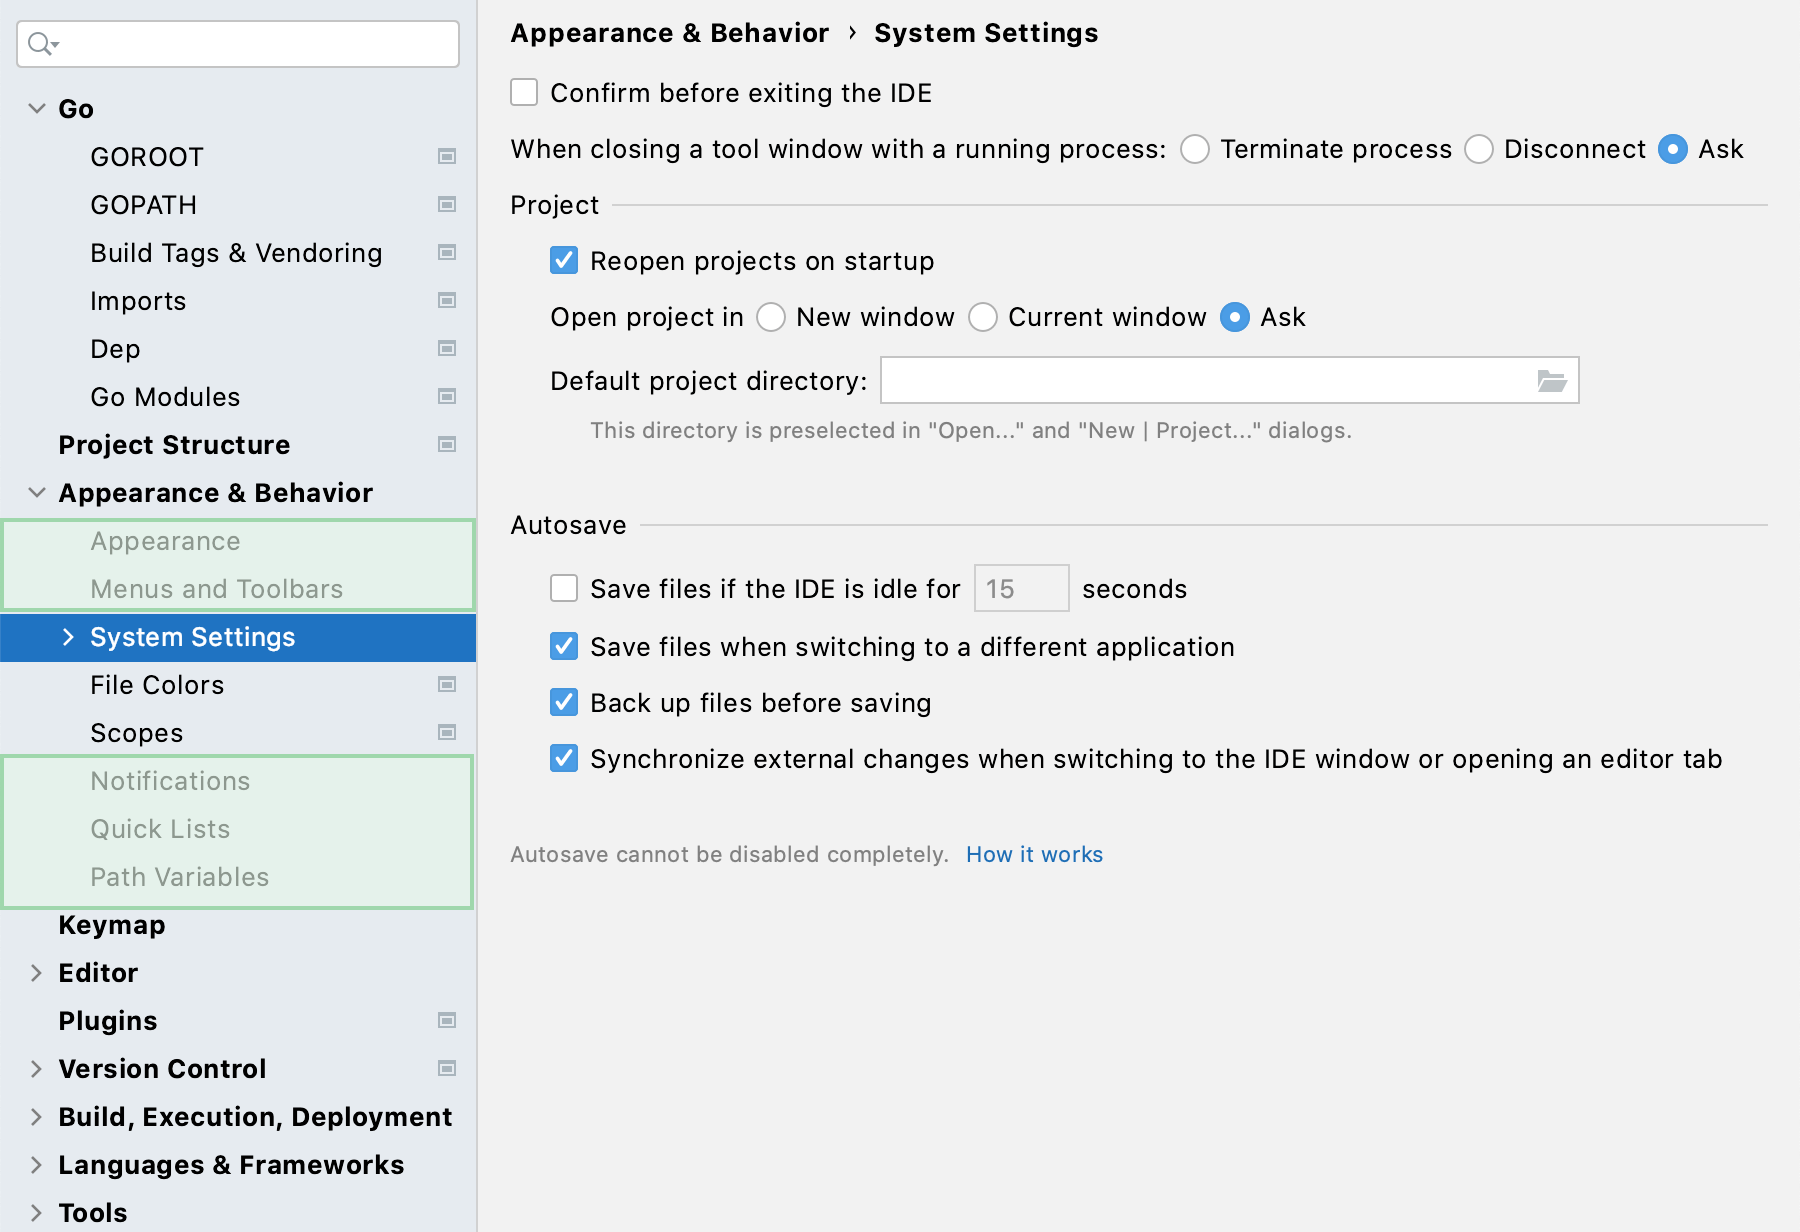 Global settings marked in the Settings/Preferences dialog